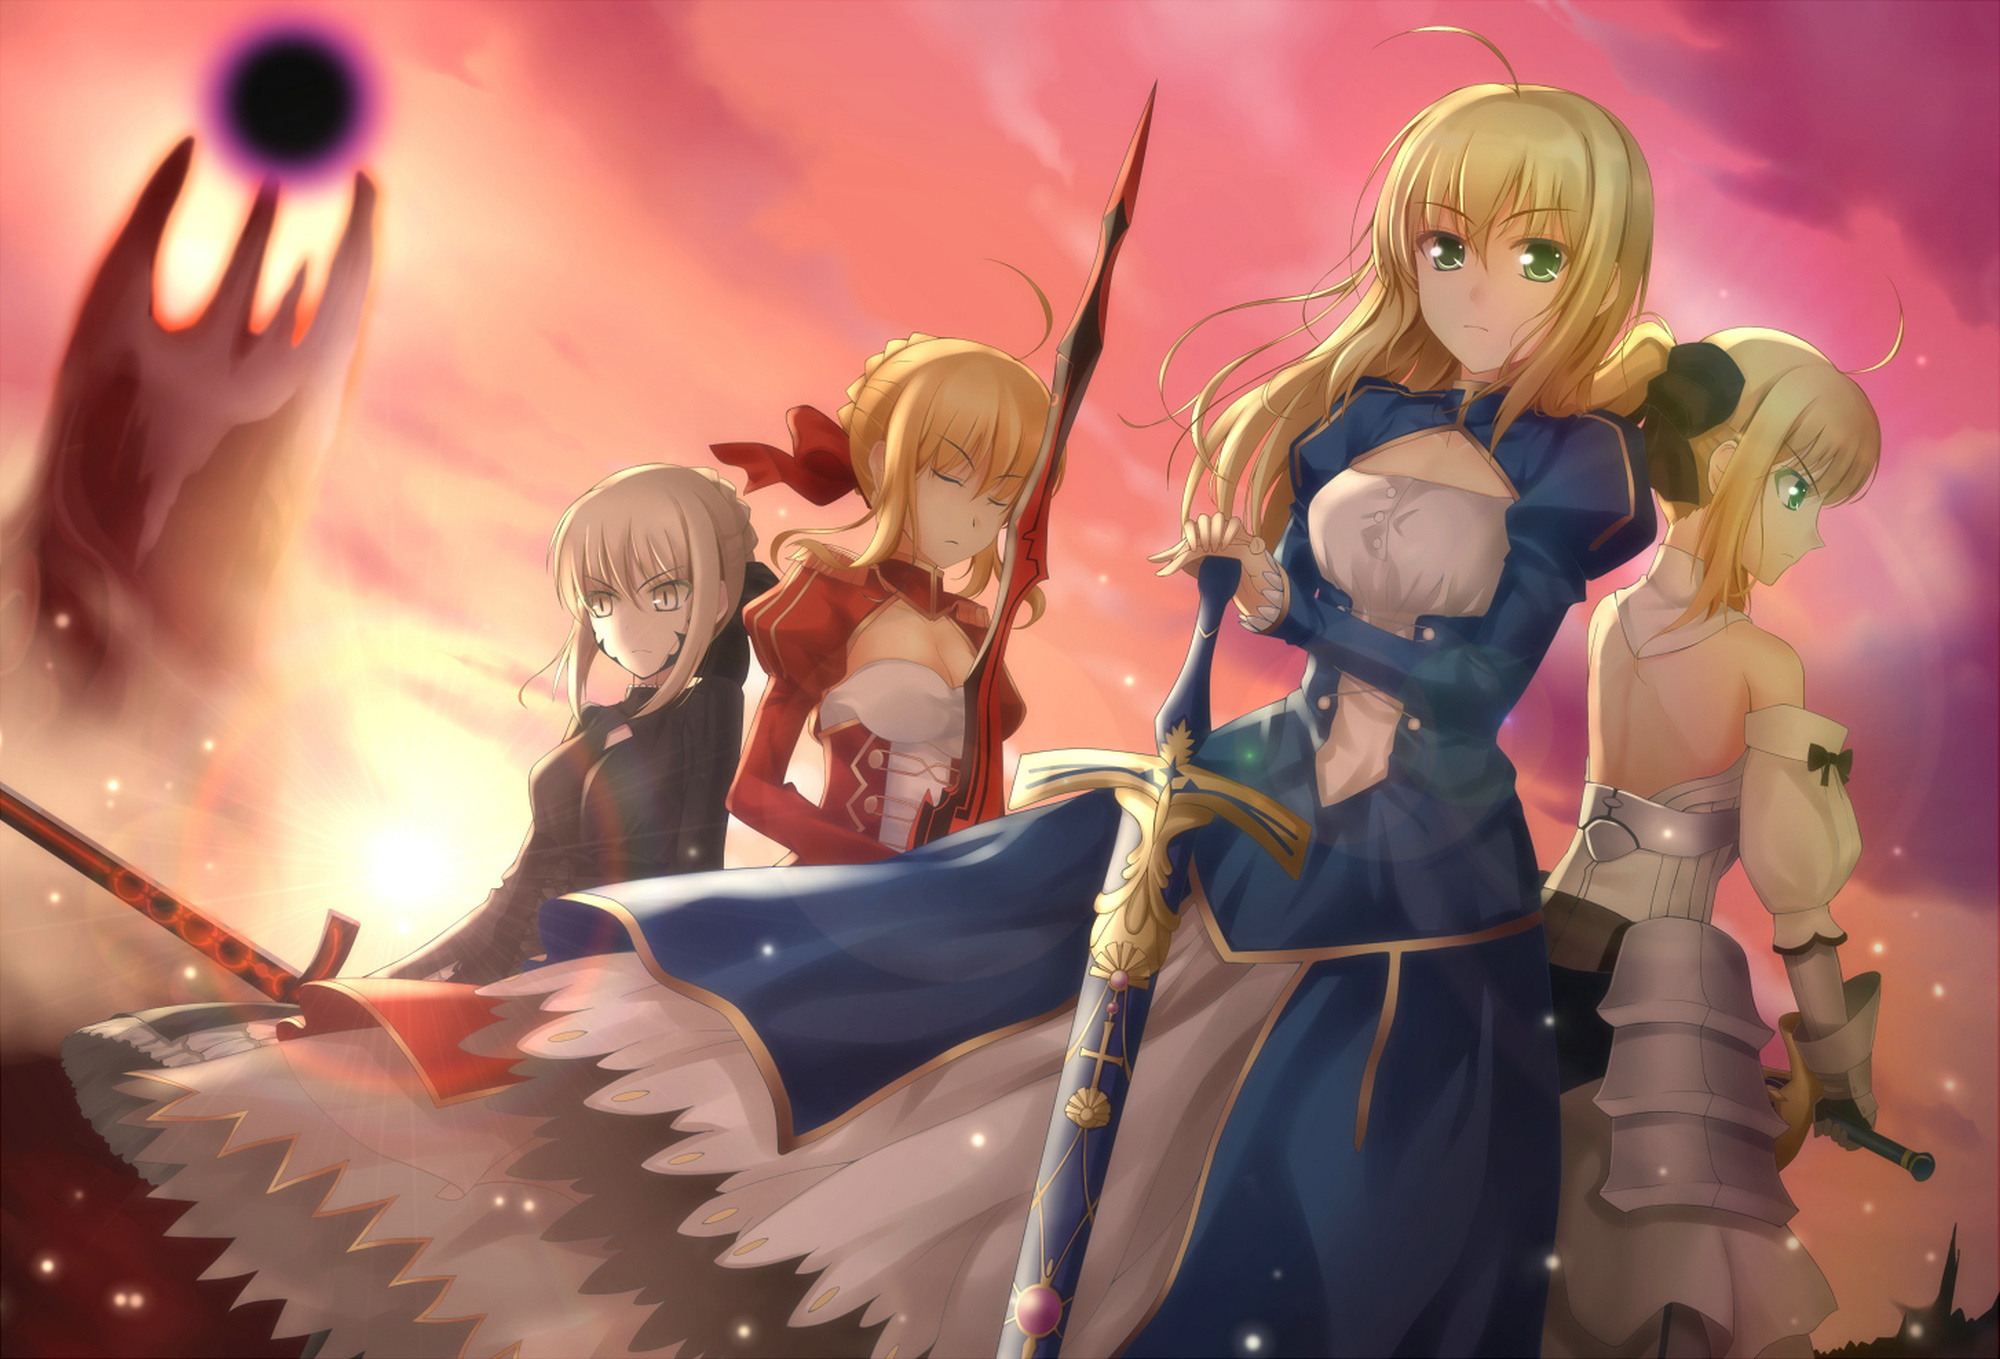 Anime 2000x1359 anime anime girls boobs Excalibur artwork digital art fan art long hair blonde ponytail Fate series Fate/Stay Night fate/stay night: heaven's feel Fate/Unlimited Codes  Fate/Extra Fate/Extra CCC Fate/Grand Order Artoria Pendragon Saber Saber Alter Saber Lily Nero Claudius